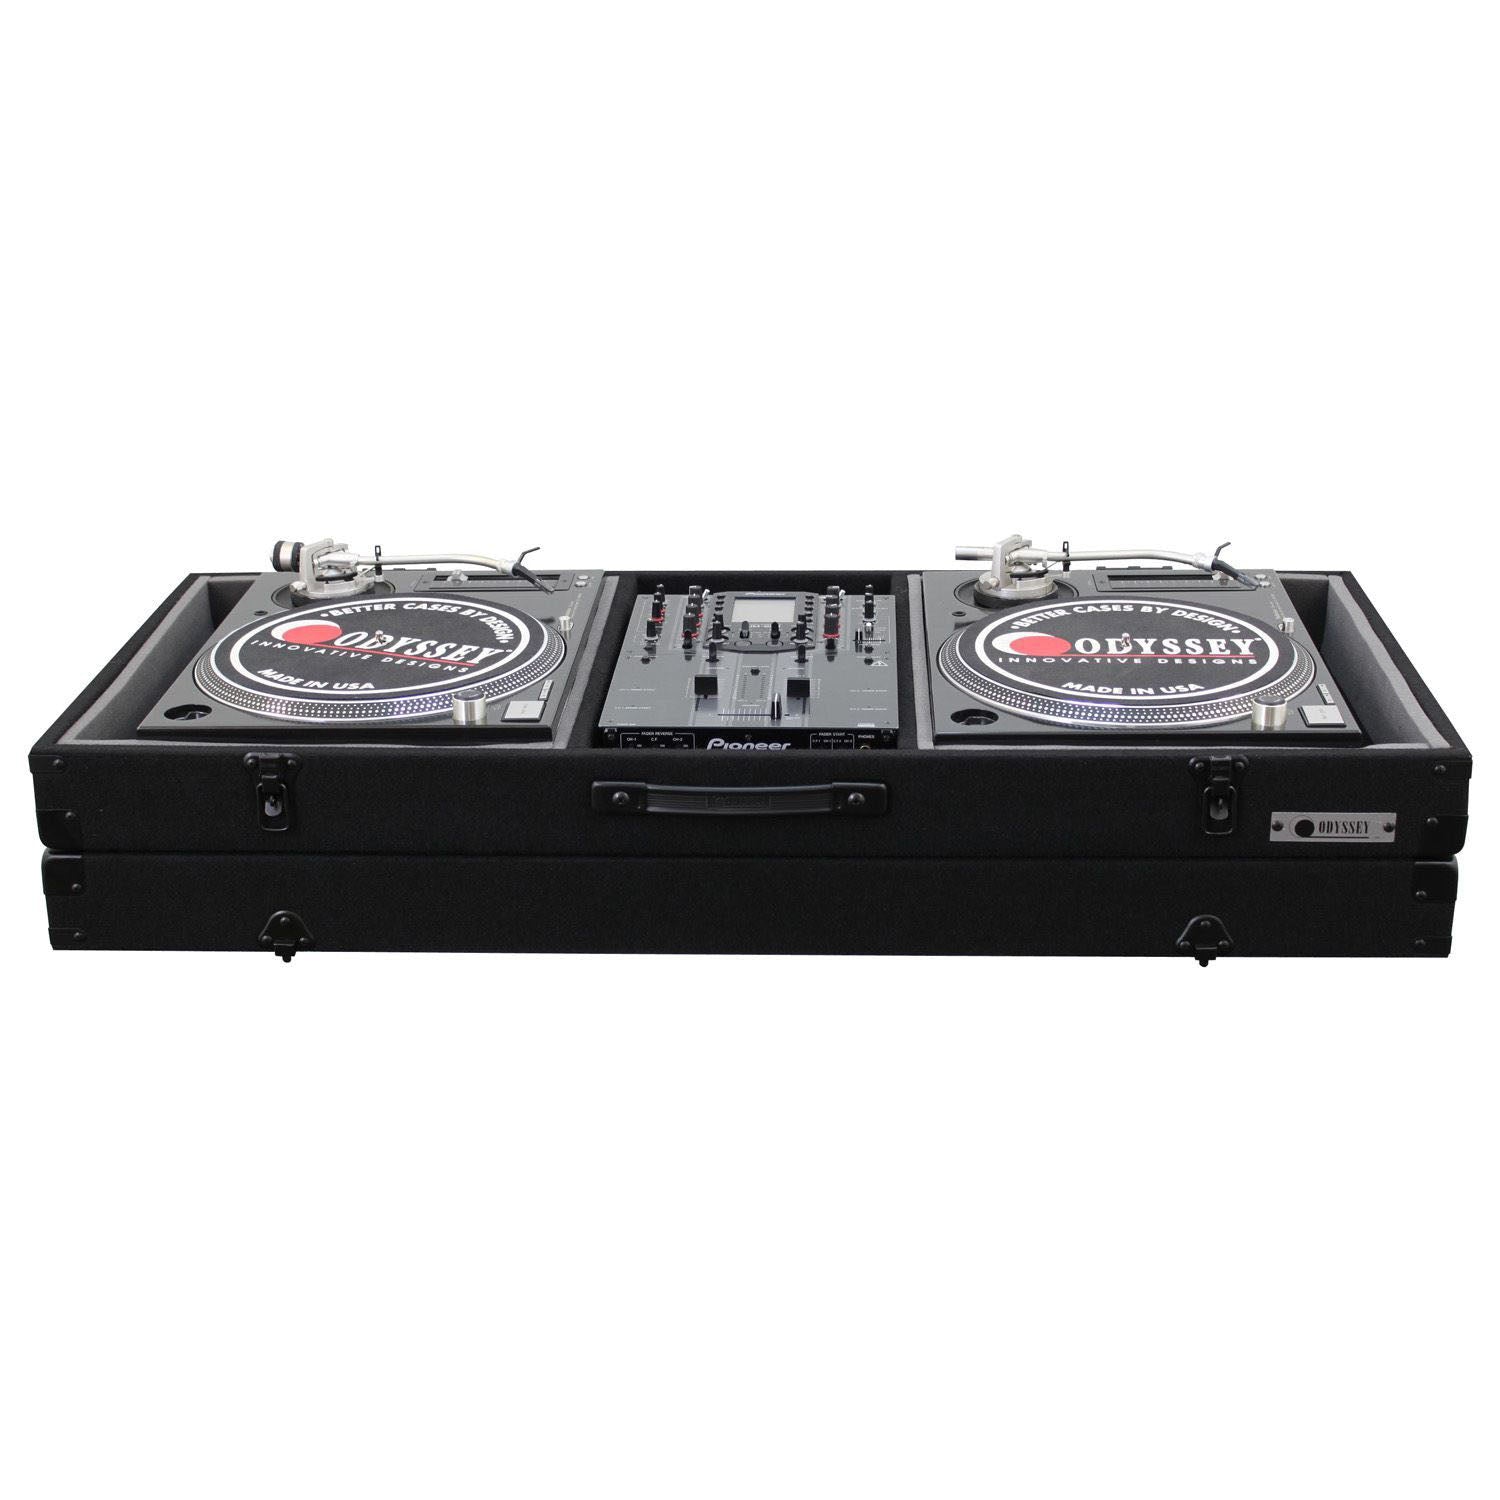 Odyssey CBM10E, Universal 10" Format DJ Mixer and Two Battle Position Turntables Carpet Coffin Case Odyssey